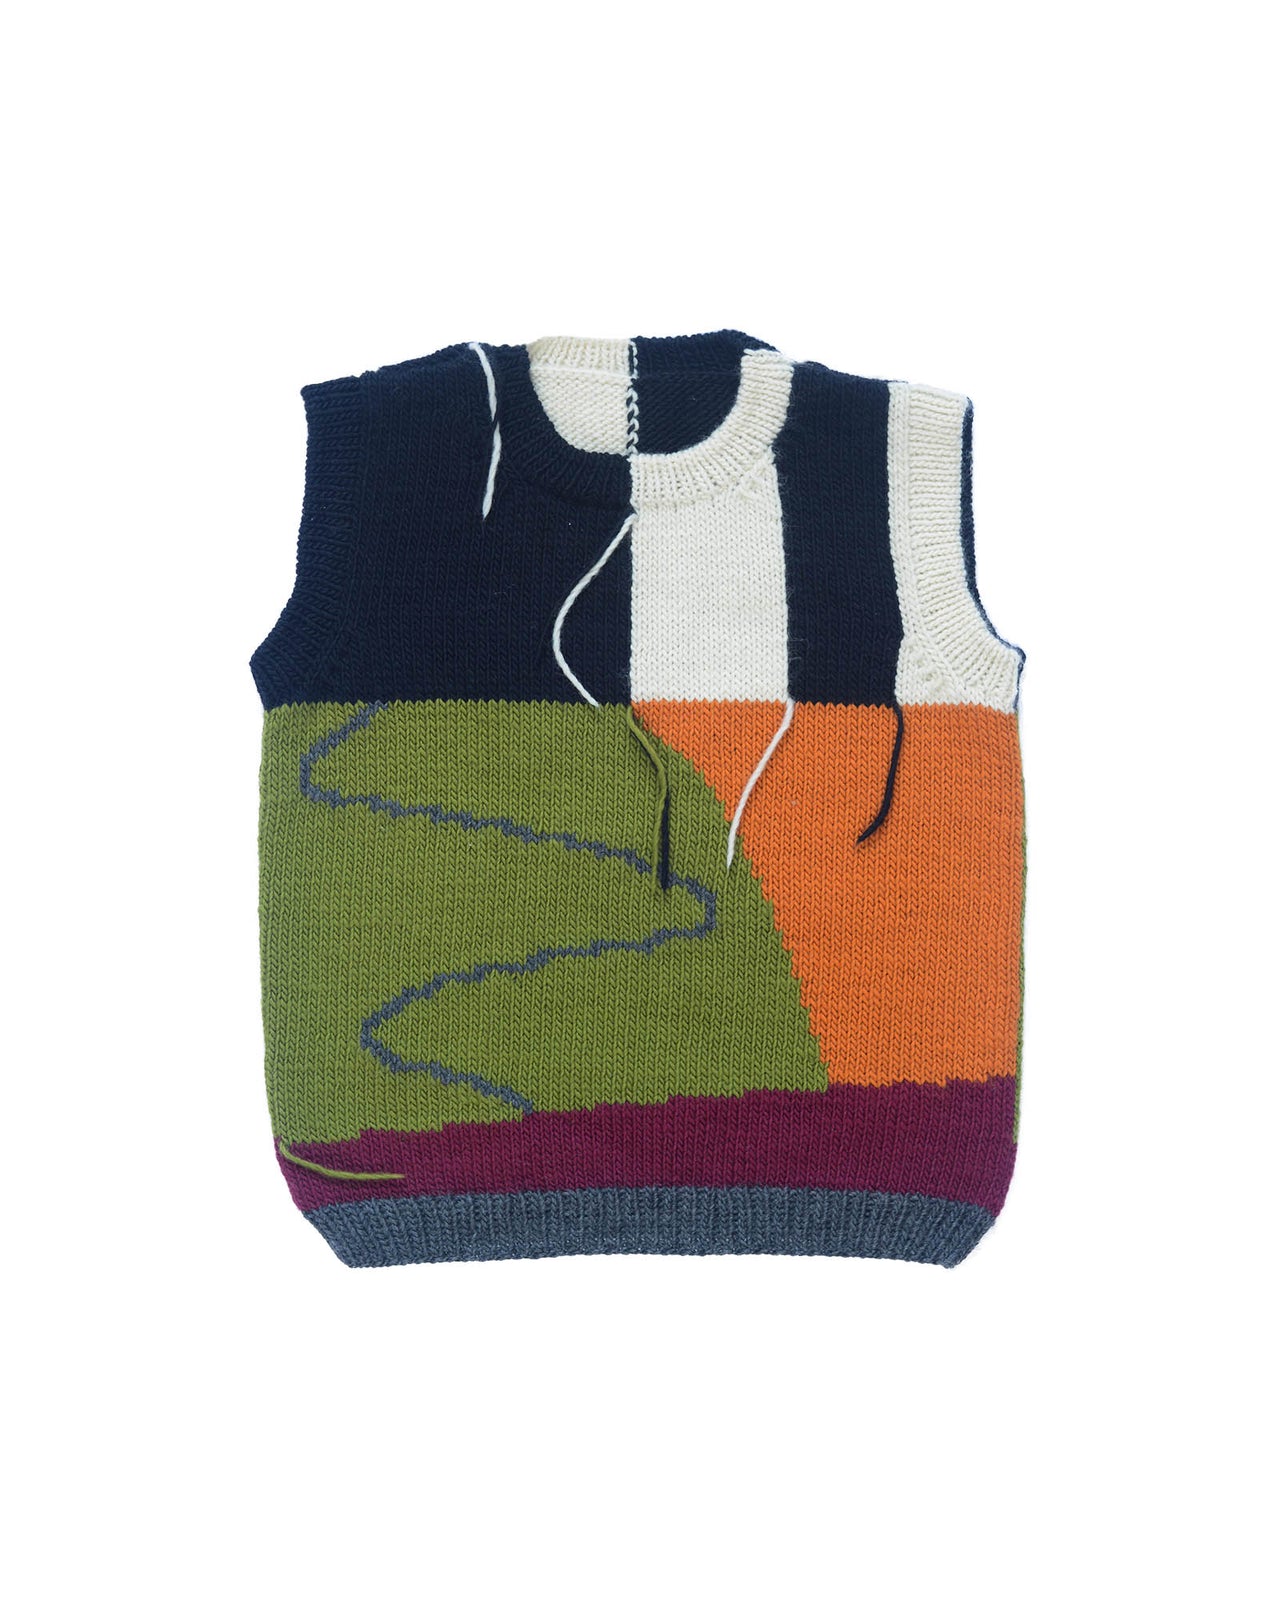 Wool vest layed flat on white background. Vest with green, orange, black, white and red colour block design and hanging threads. 